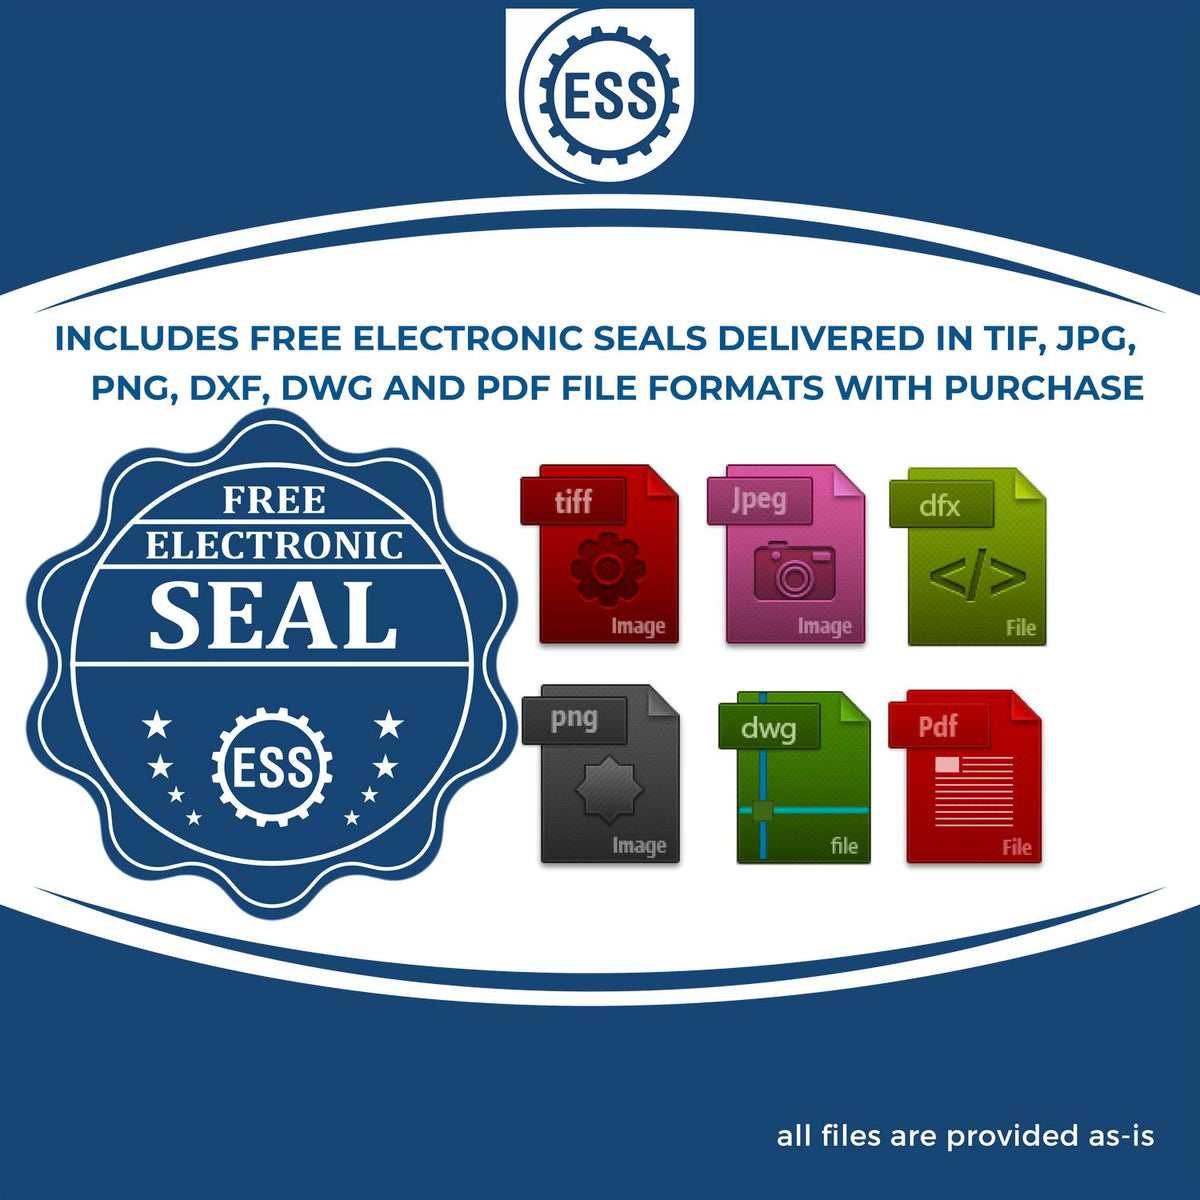 An infographic for the free electronic seal for the PSI South Carolina Notary Stamp illustrating the different file type icons such as DXF, DWG, TIF, JPG and PNG.